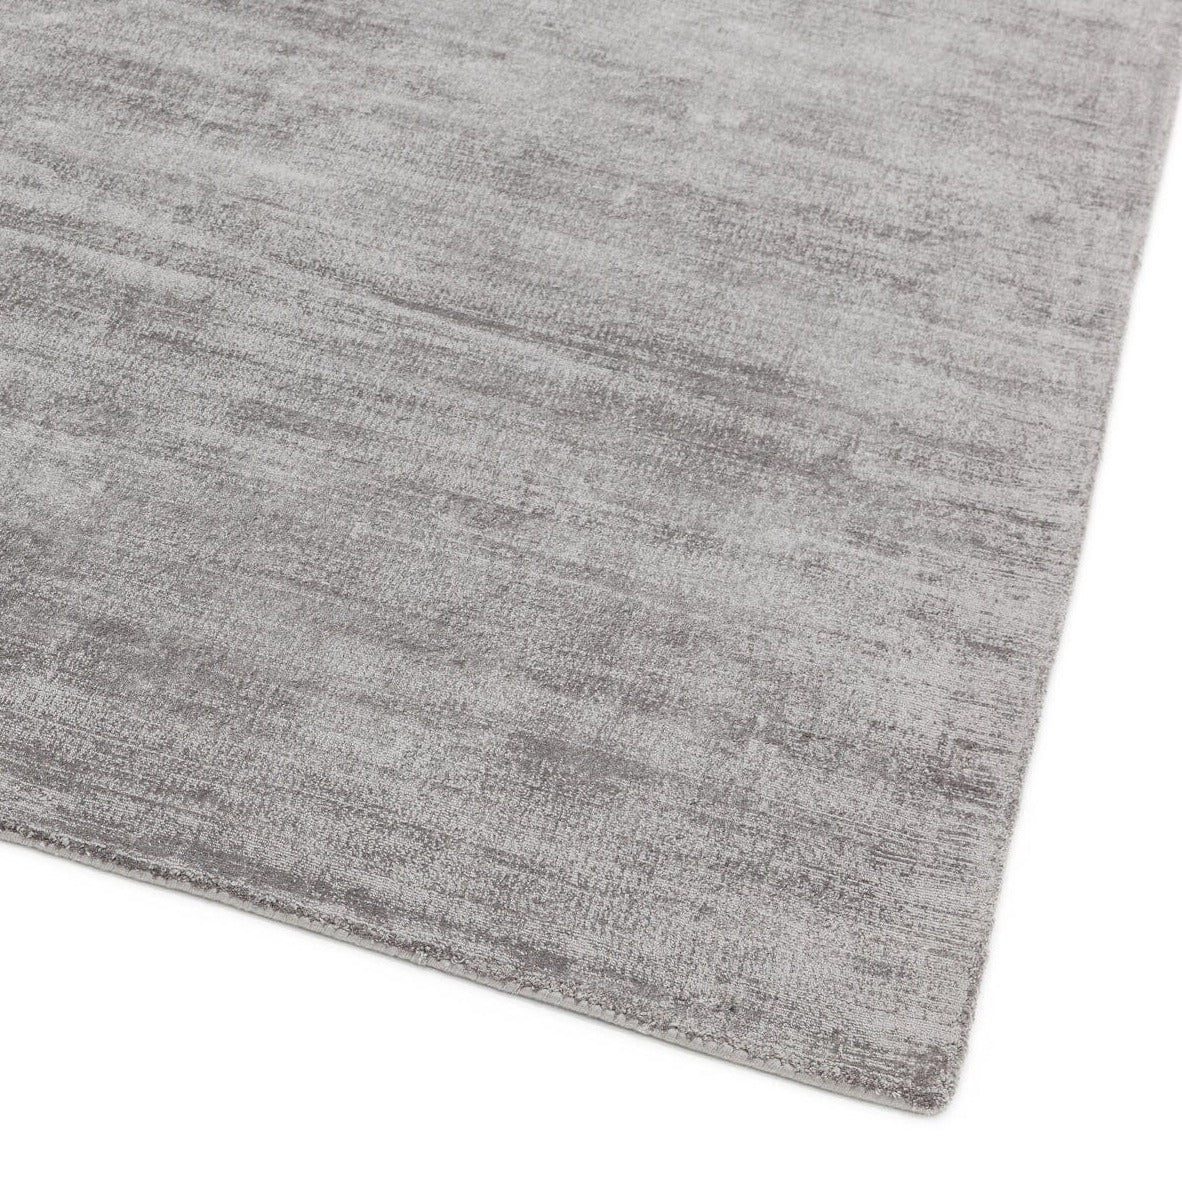  Asiatic Carpets-Asiatic Carpets Blade Hand Woven Rug Silver - 200 x 290cm-Grey, Silver 581 